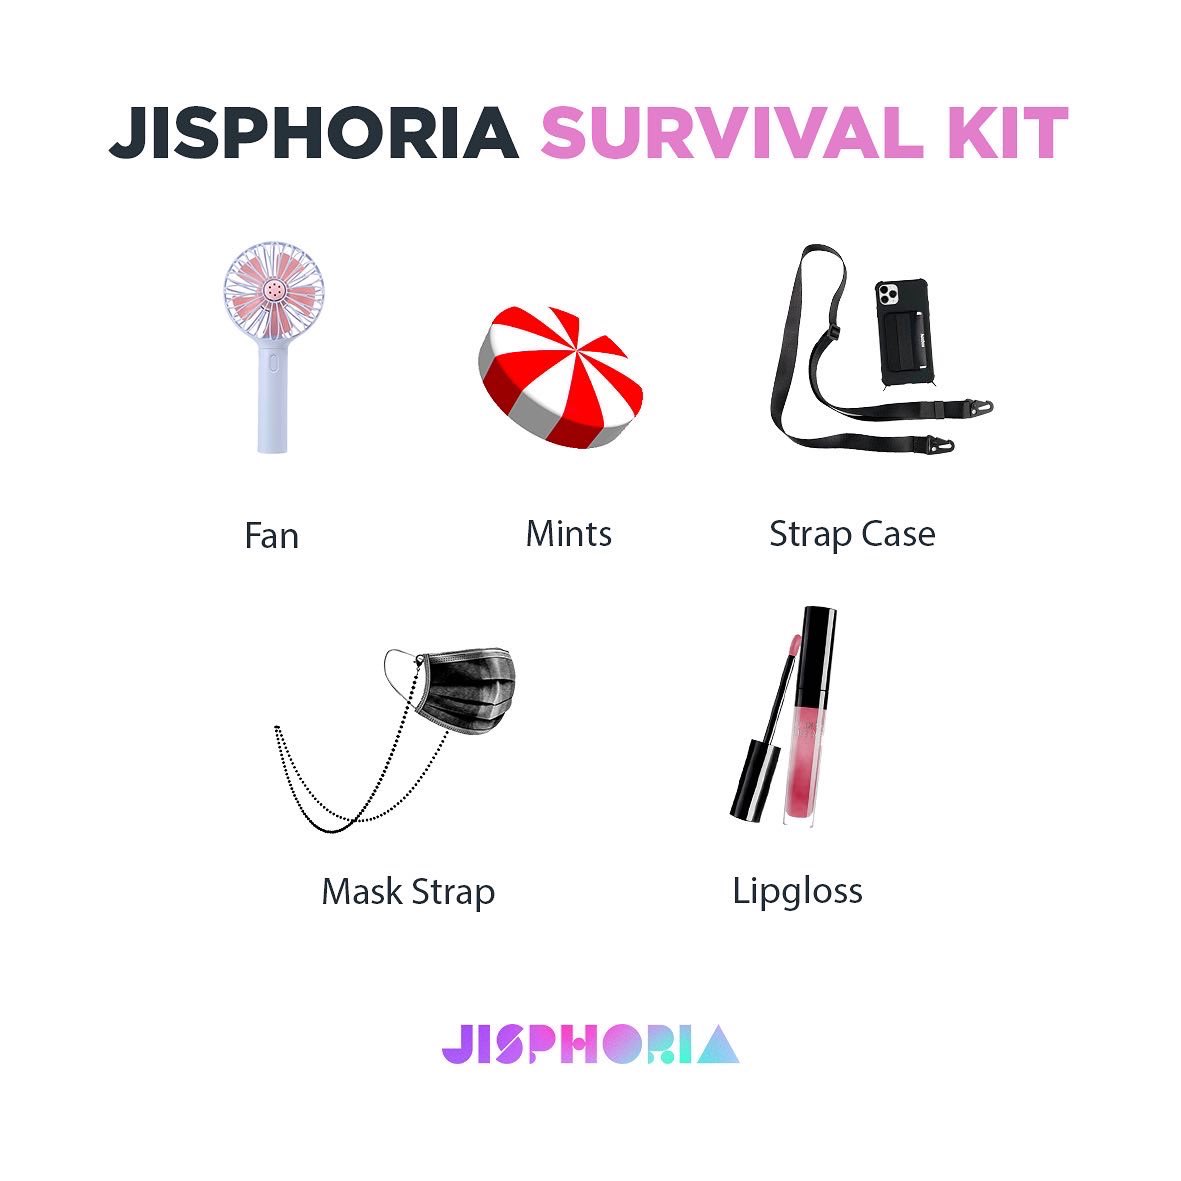 [JISPHORIA SURVIVAL KIT] Important things to bring to #JISPHORIA! Avoid carrying unnecessary items, so you can dance and have fun! Just 2 days left to #JISPHORIA! Are you ready to rock #JISPHORIA?! ❤️‍🔥 – October 1st, 2022 at Jakarta International Stadium @jakintstadium